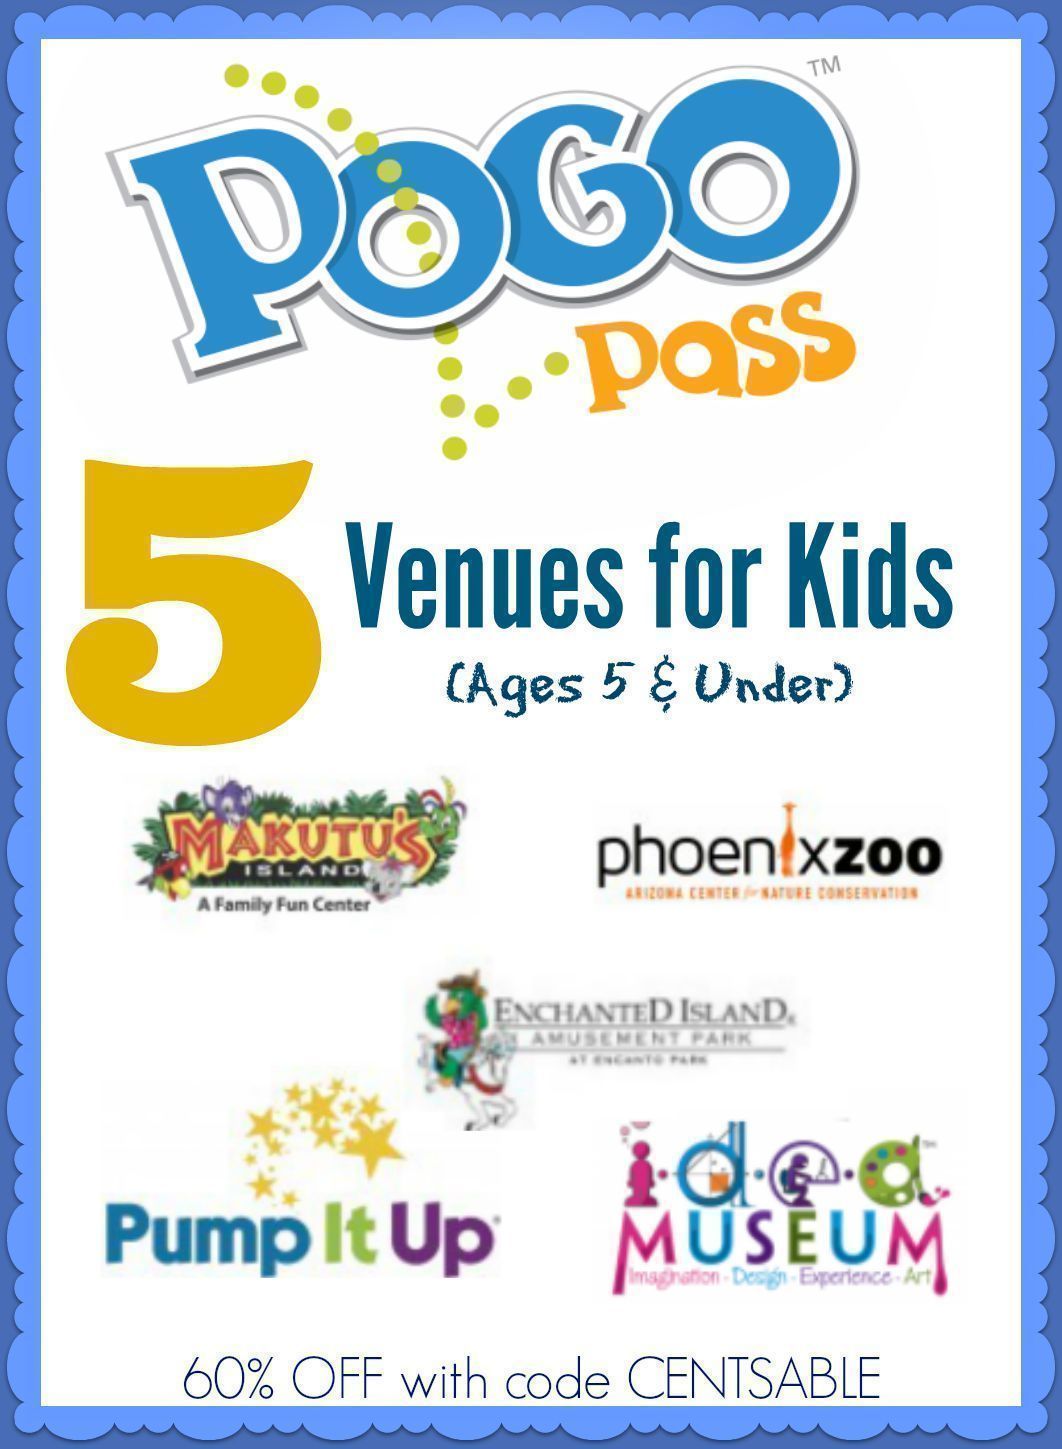 Top 5 POGO Pass Venues for Kids 5 and Under (+ *HOT* September Promotion!)